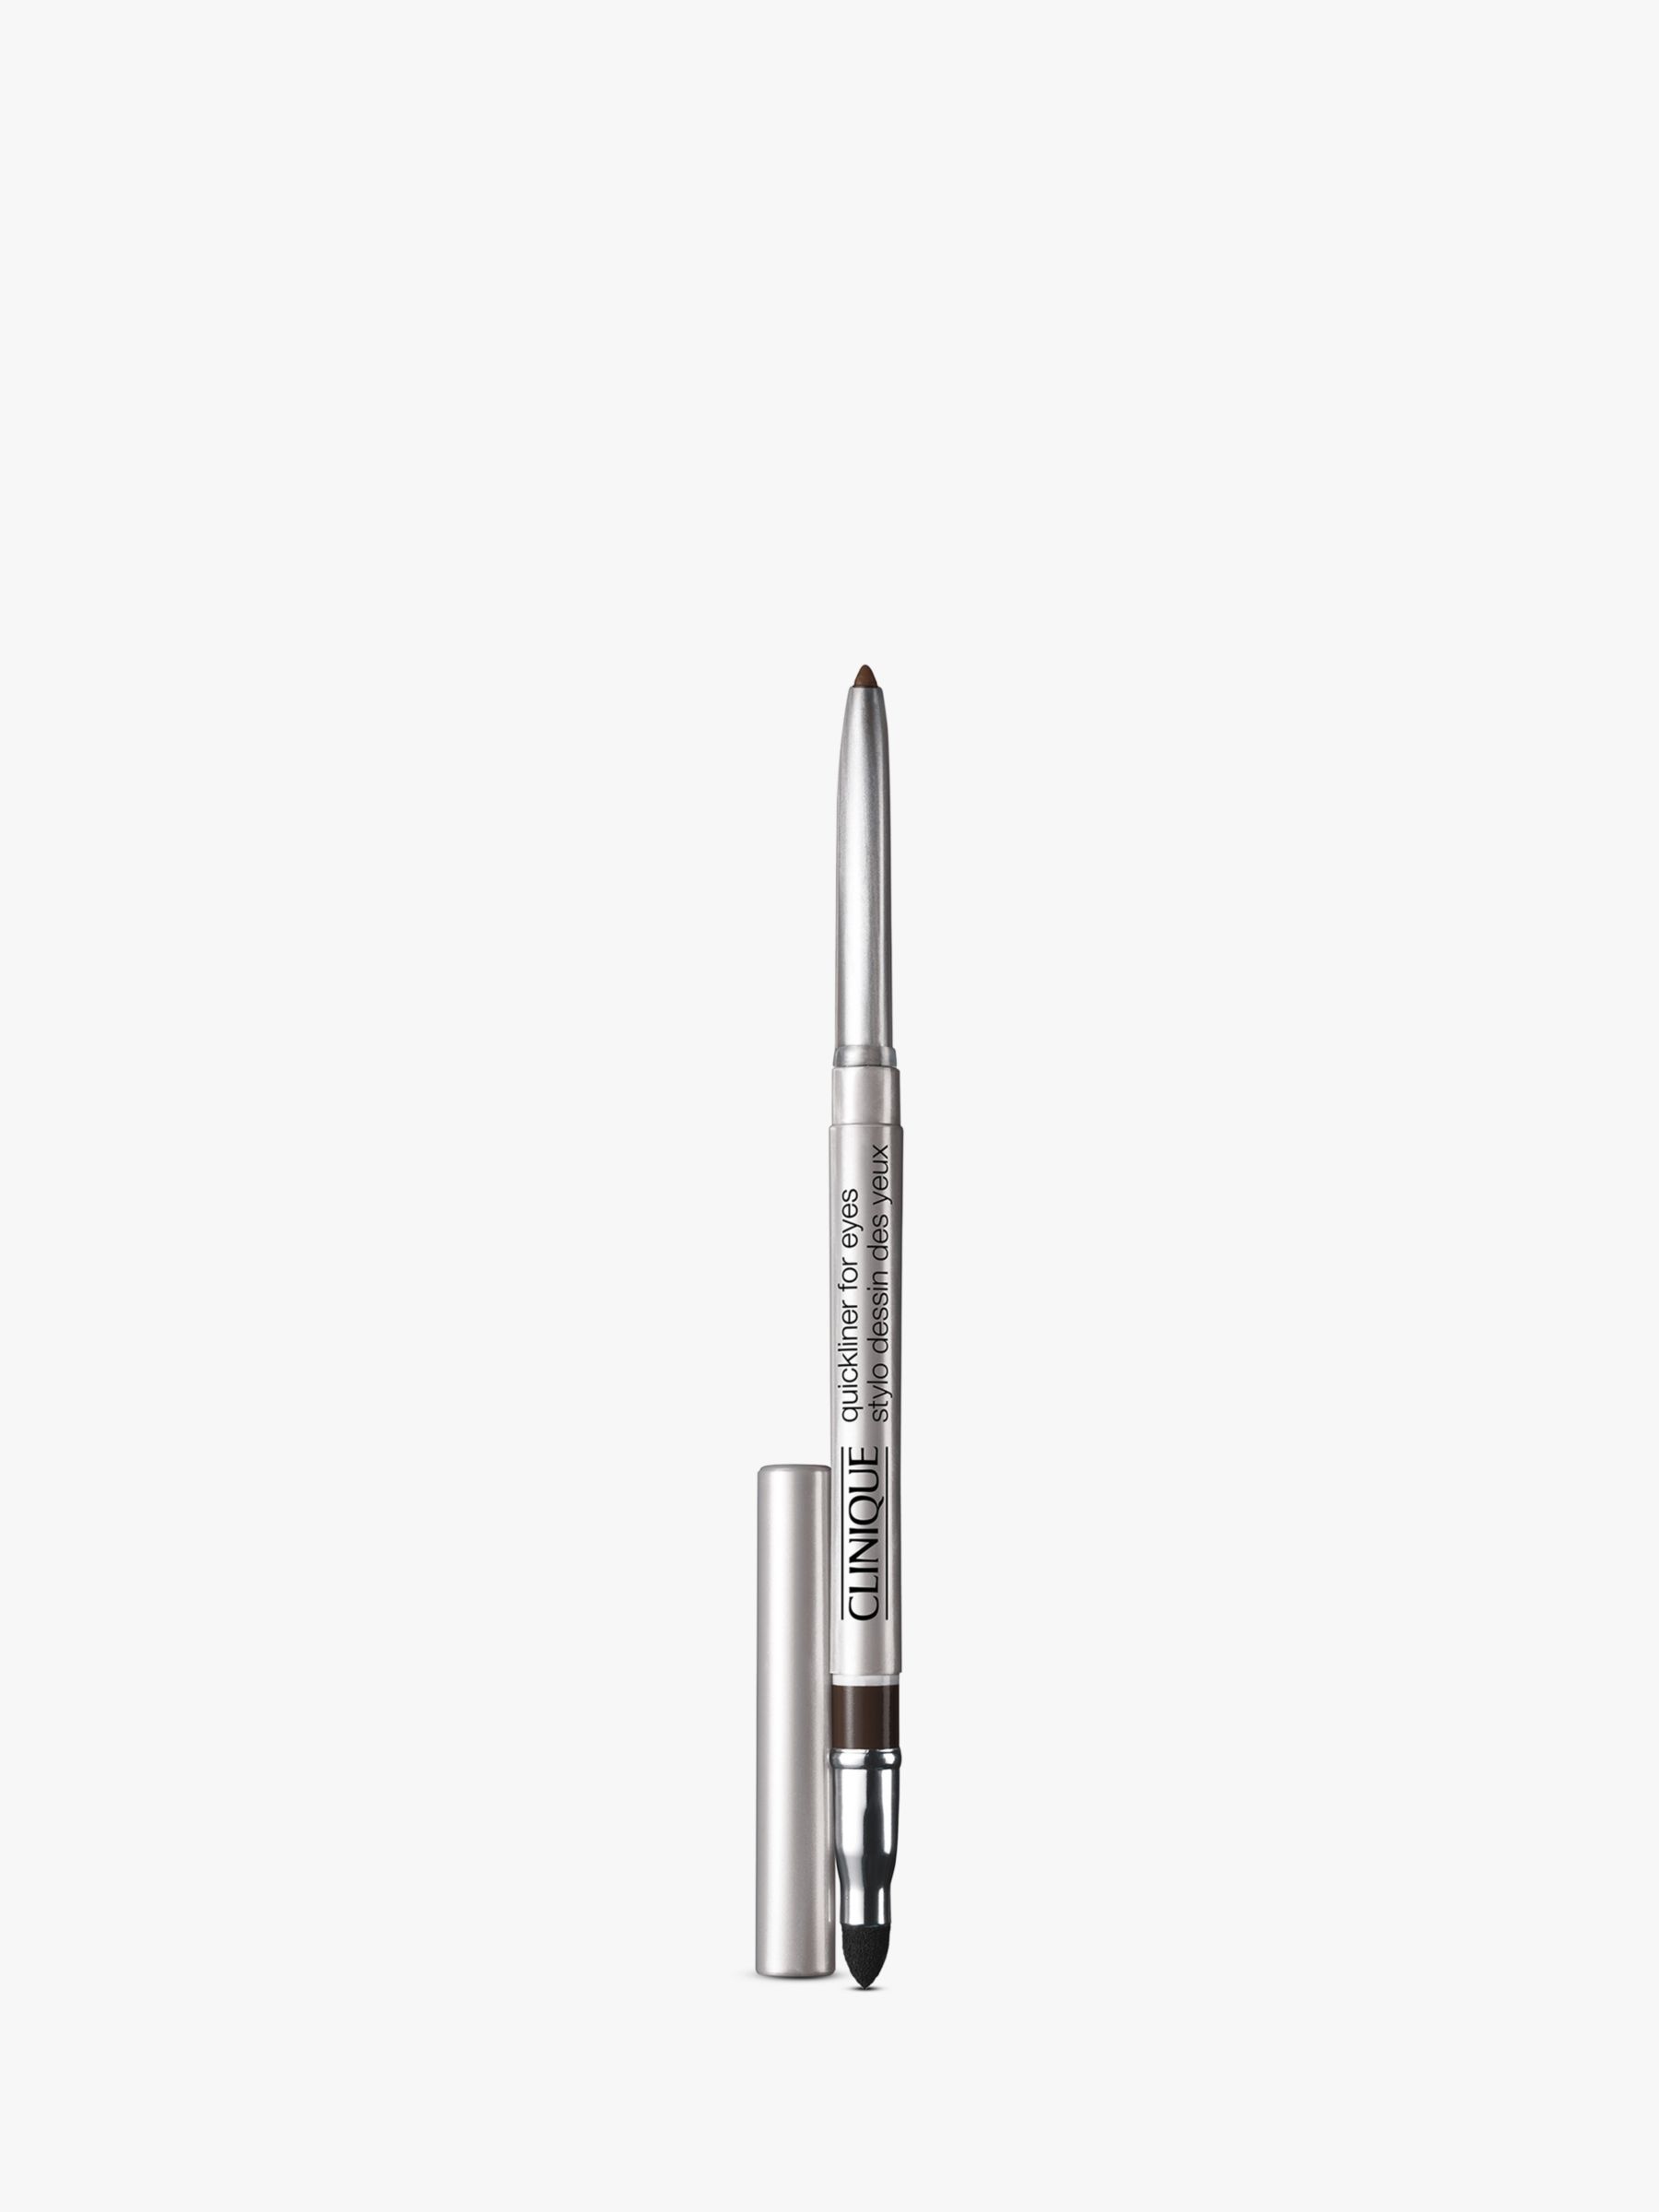 Clinique Quickliner for Eyes, Black/Brown